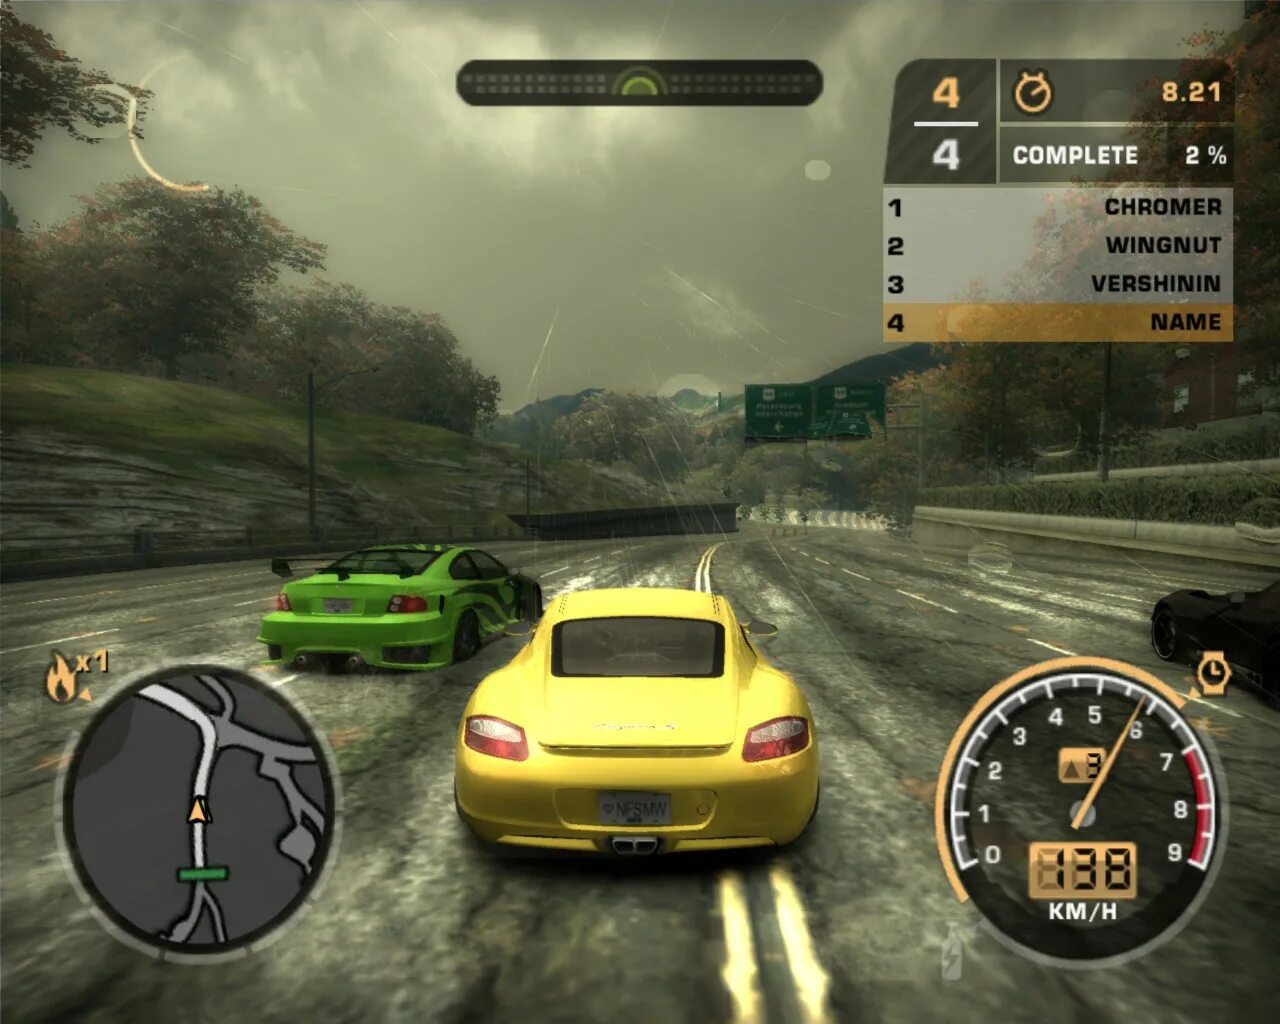 Nfs mw 2. Need for Speed most wanted 2005 ps2. NFS MW 2005 ps2. NFS MW 2005 ps2 Demo. NFS most wanted 2005 ps2 управление.